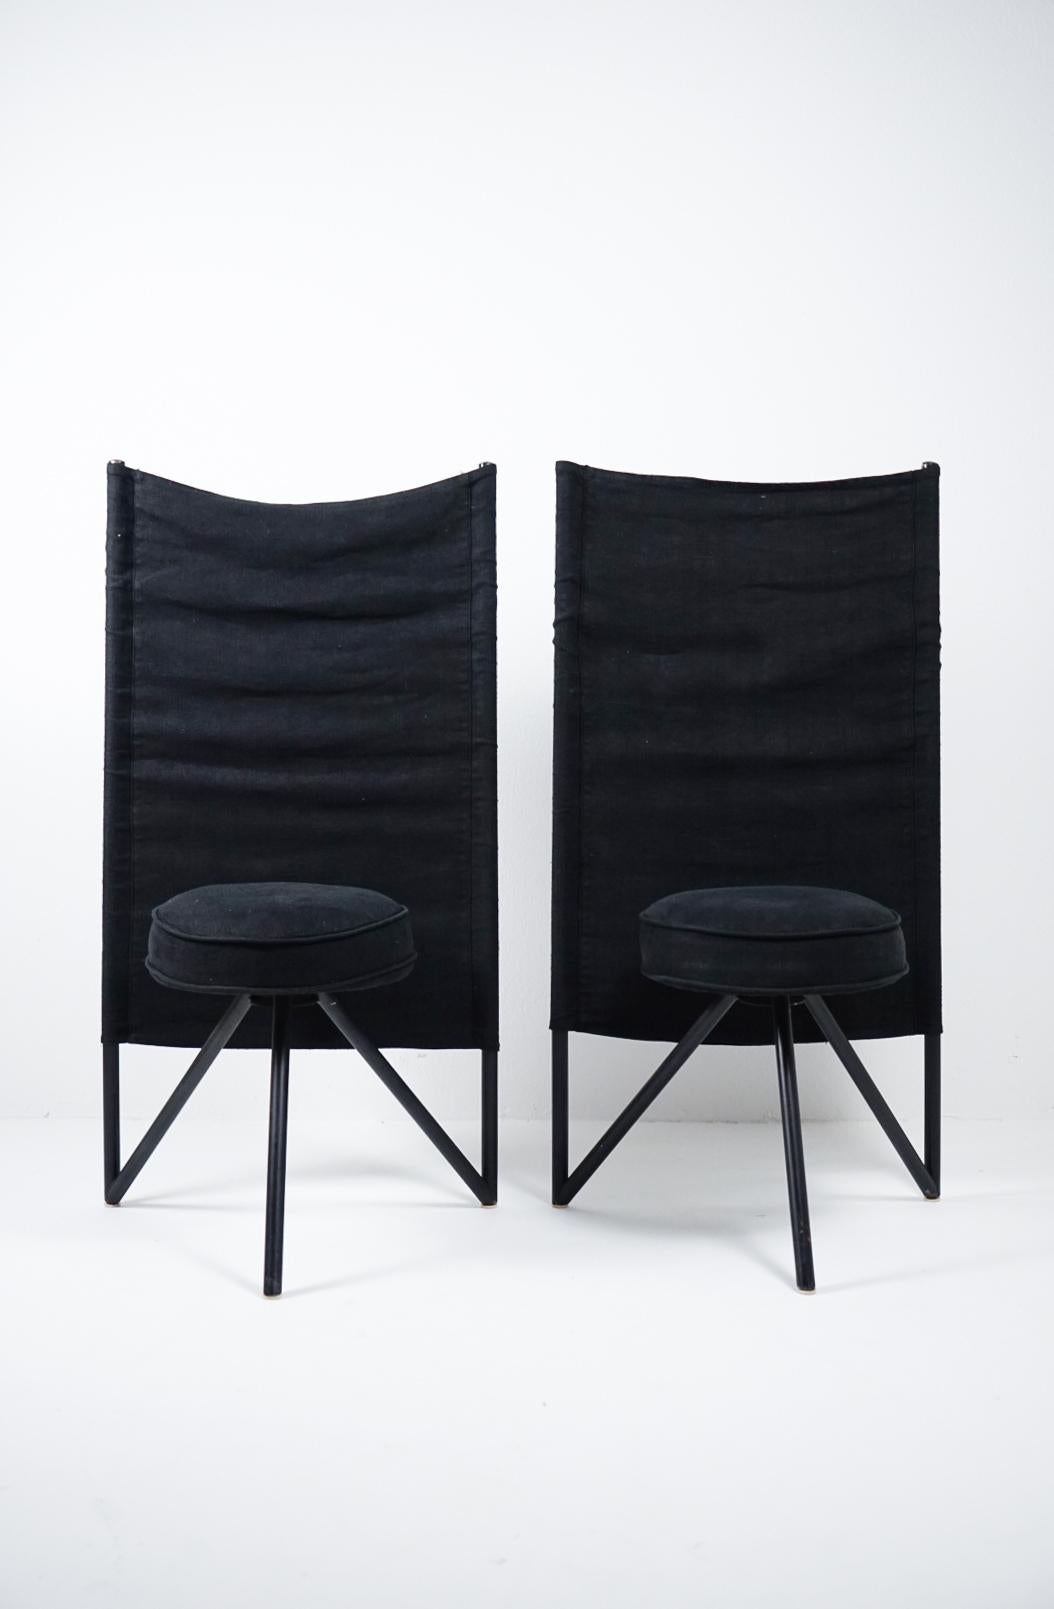 Rare Post Modern Pair of Miss Wirt Chairs by Philippe Starck for Disform in original black linen. Miss Wirt tripod, three legged chairs produced in Spain 1982/198 by Disform. Black cotton linen fabric is stretched over two vertical steel tubes and